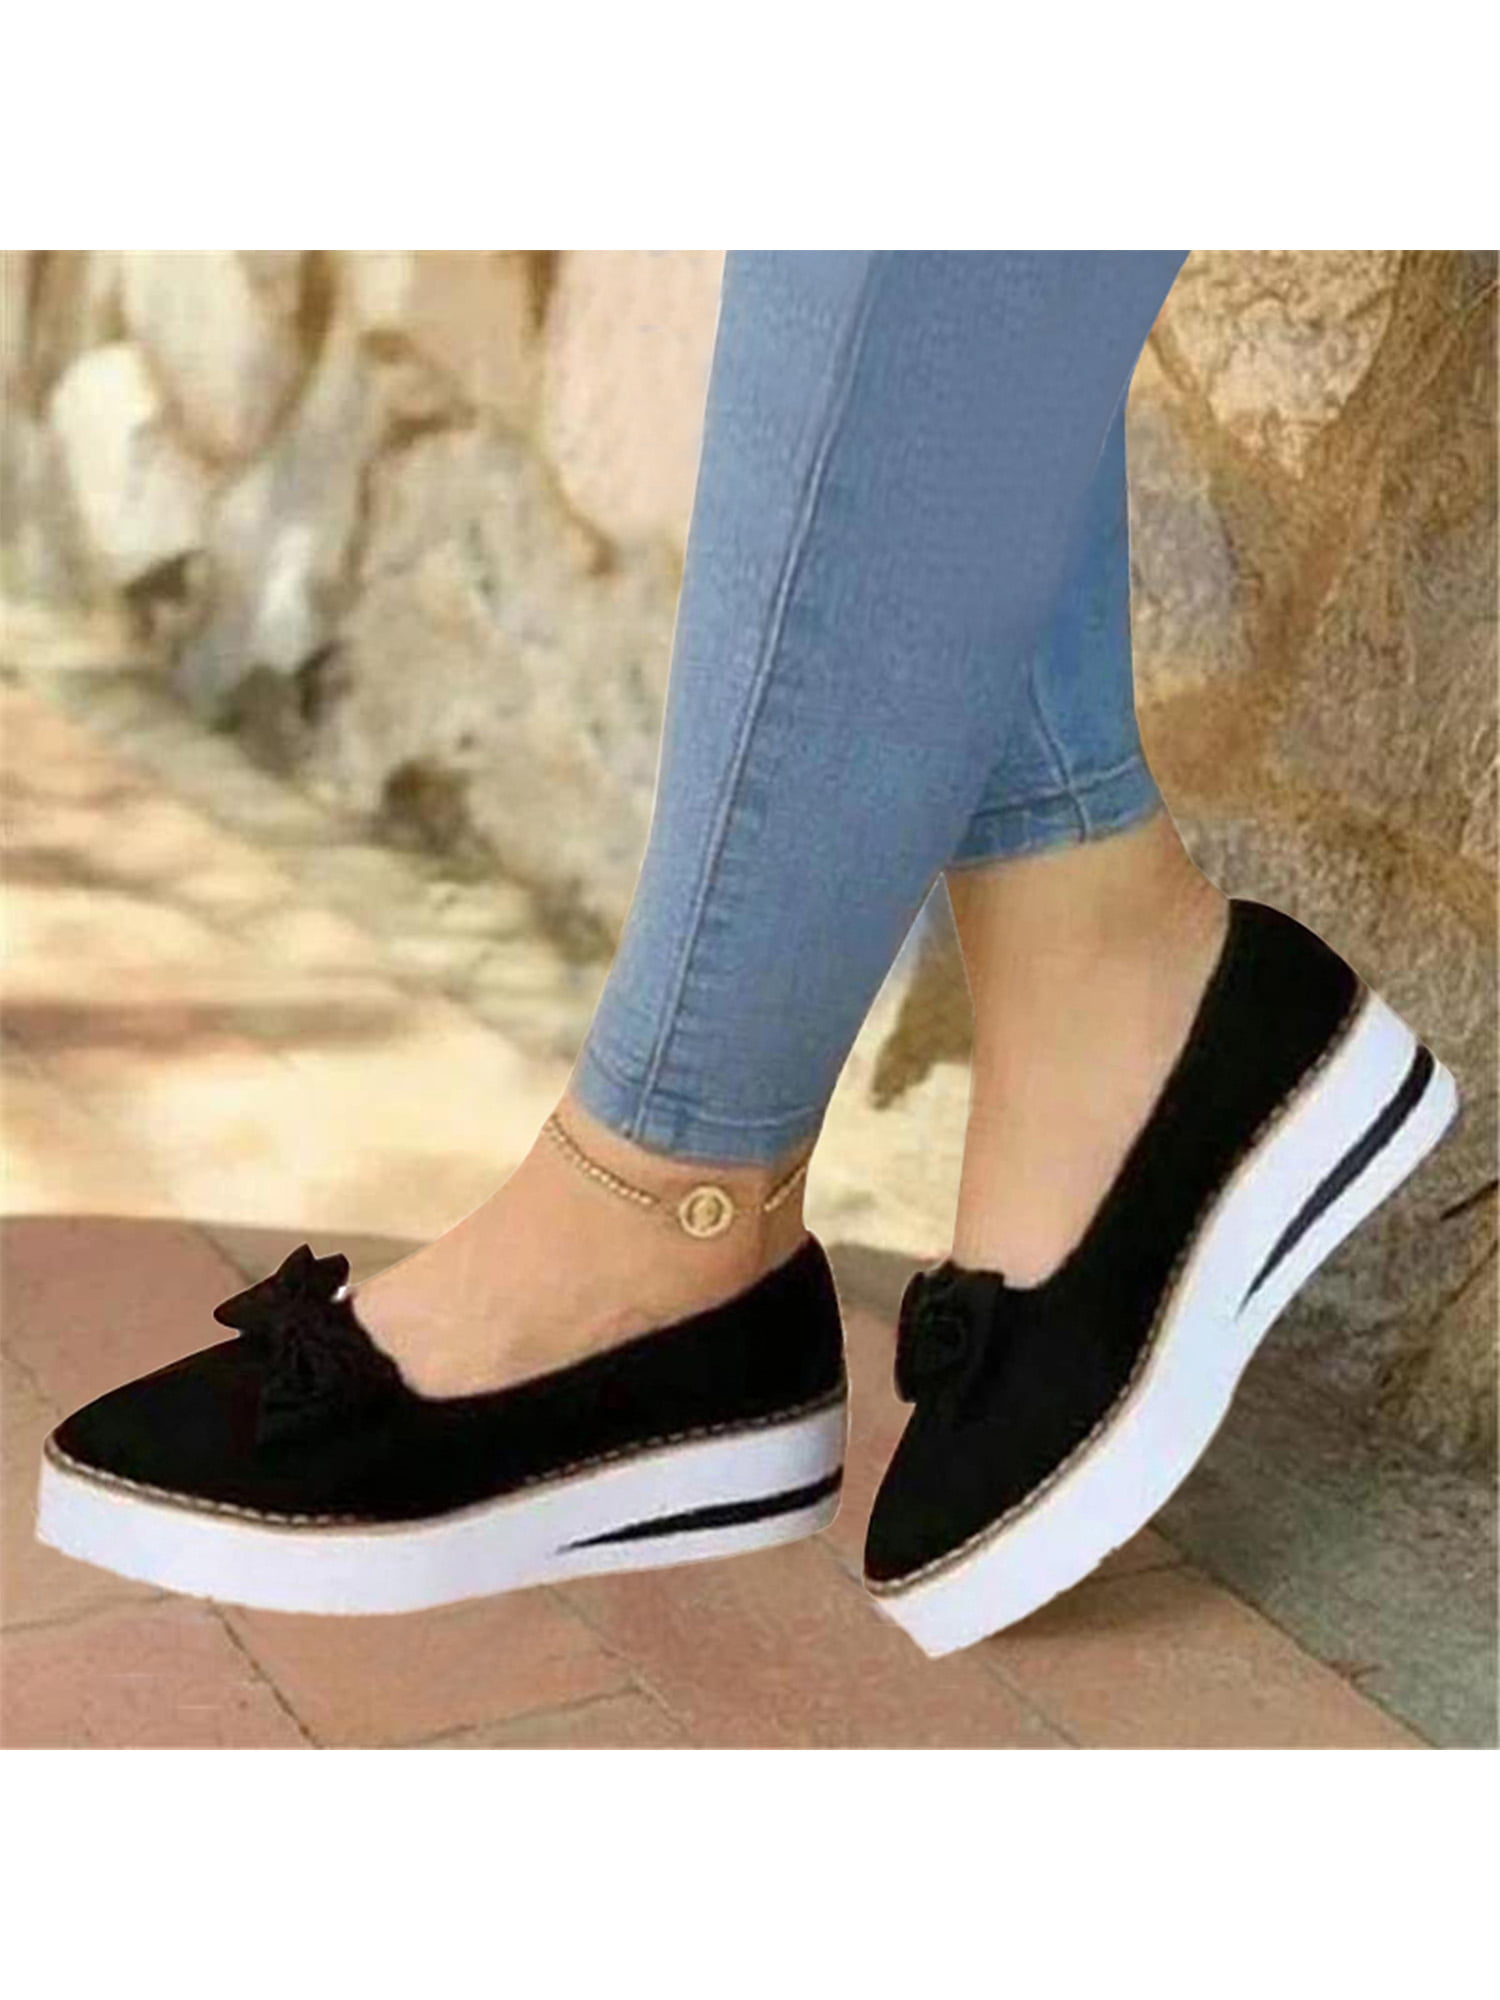 New Ladies Womens Flat Casual Comfort Diamante Work Pumps Loafers Shoes UK 3 4 8 